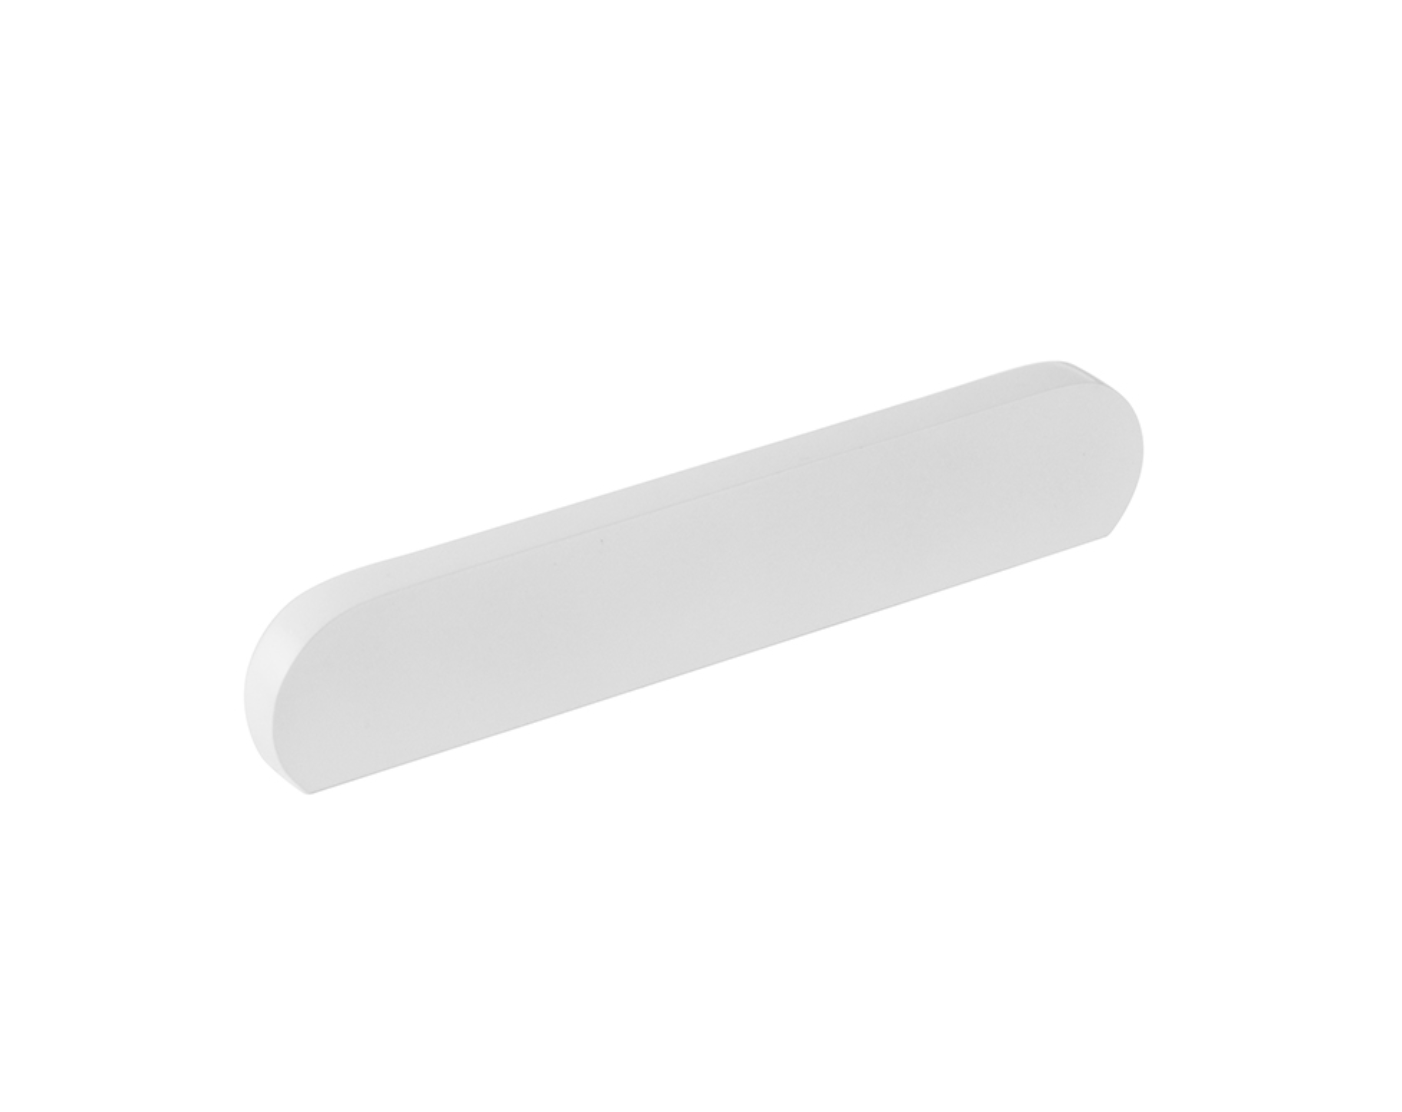 Matte White "Bit" Rounded Drawer Pulls and Cabinet Knobs